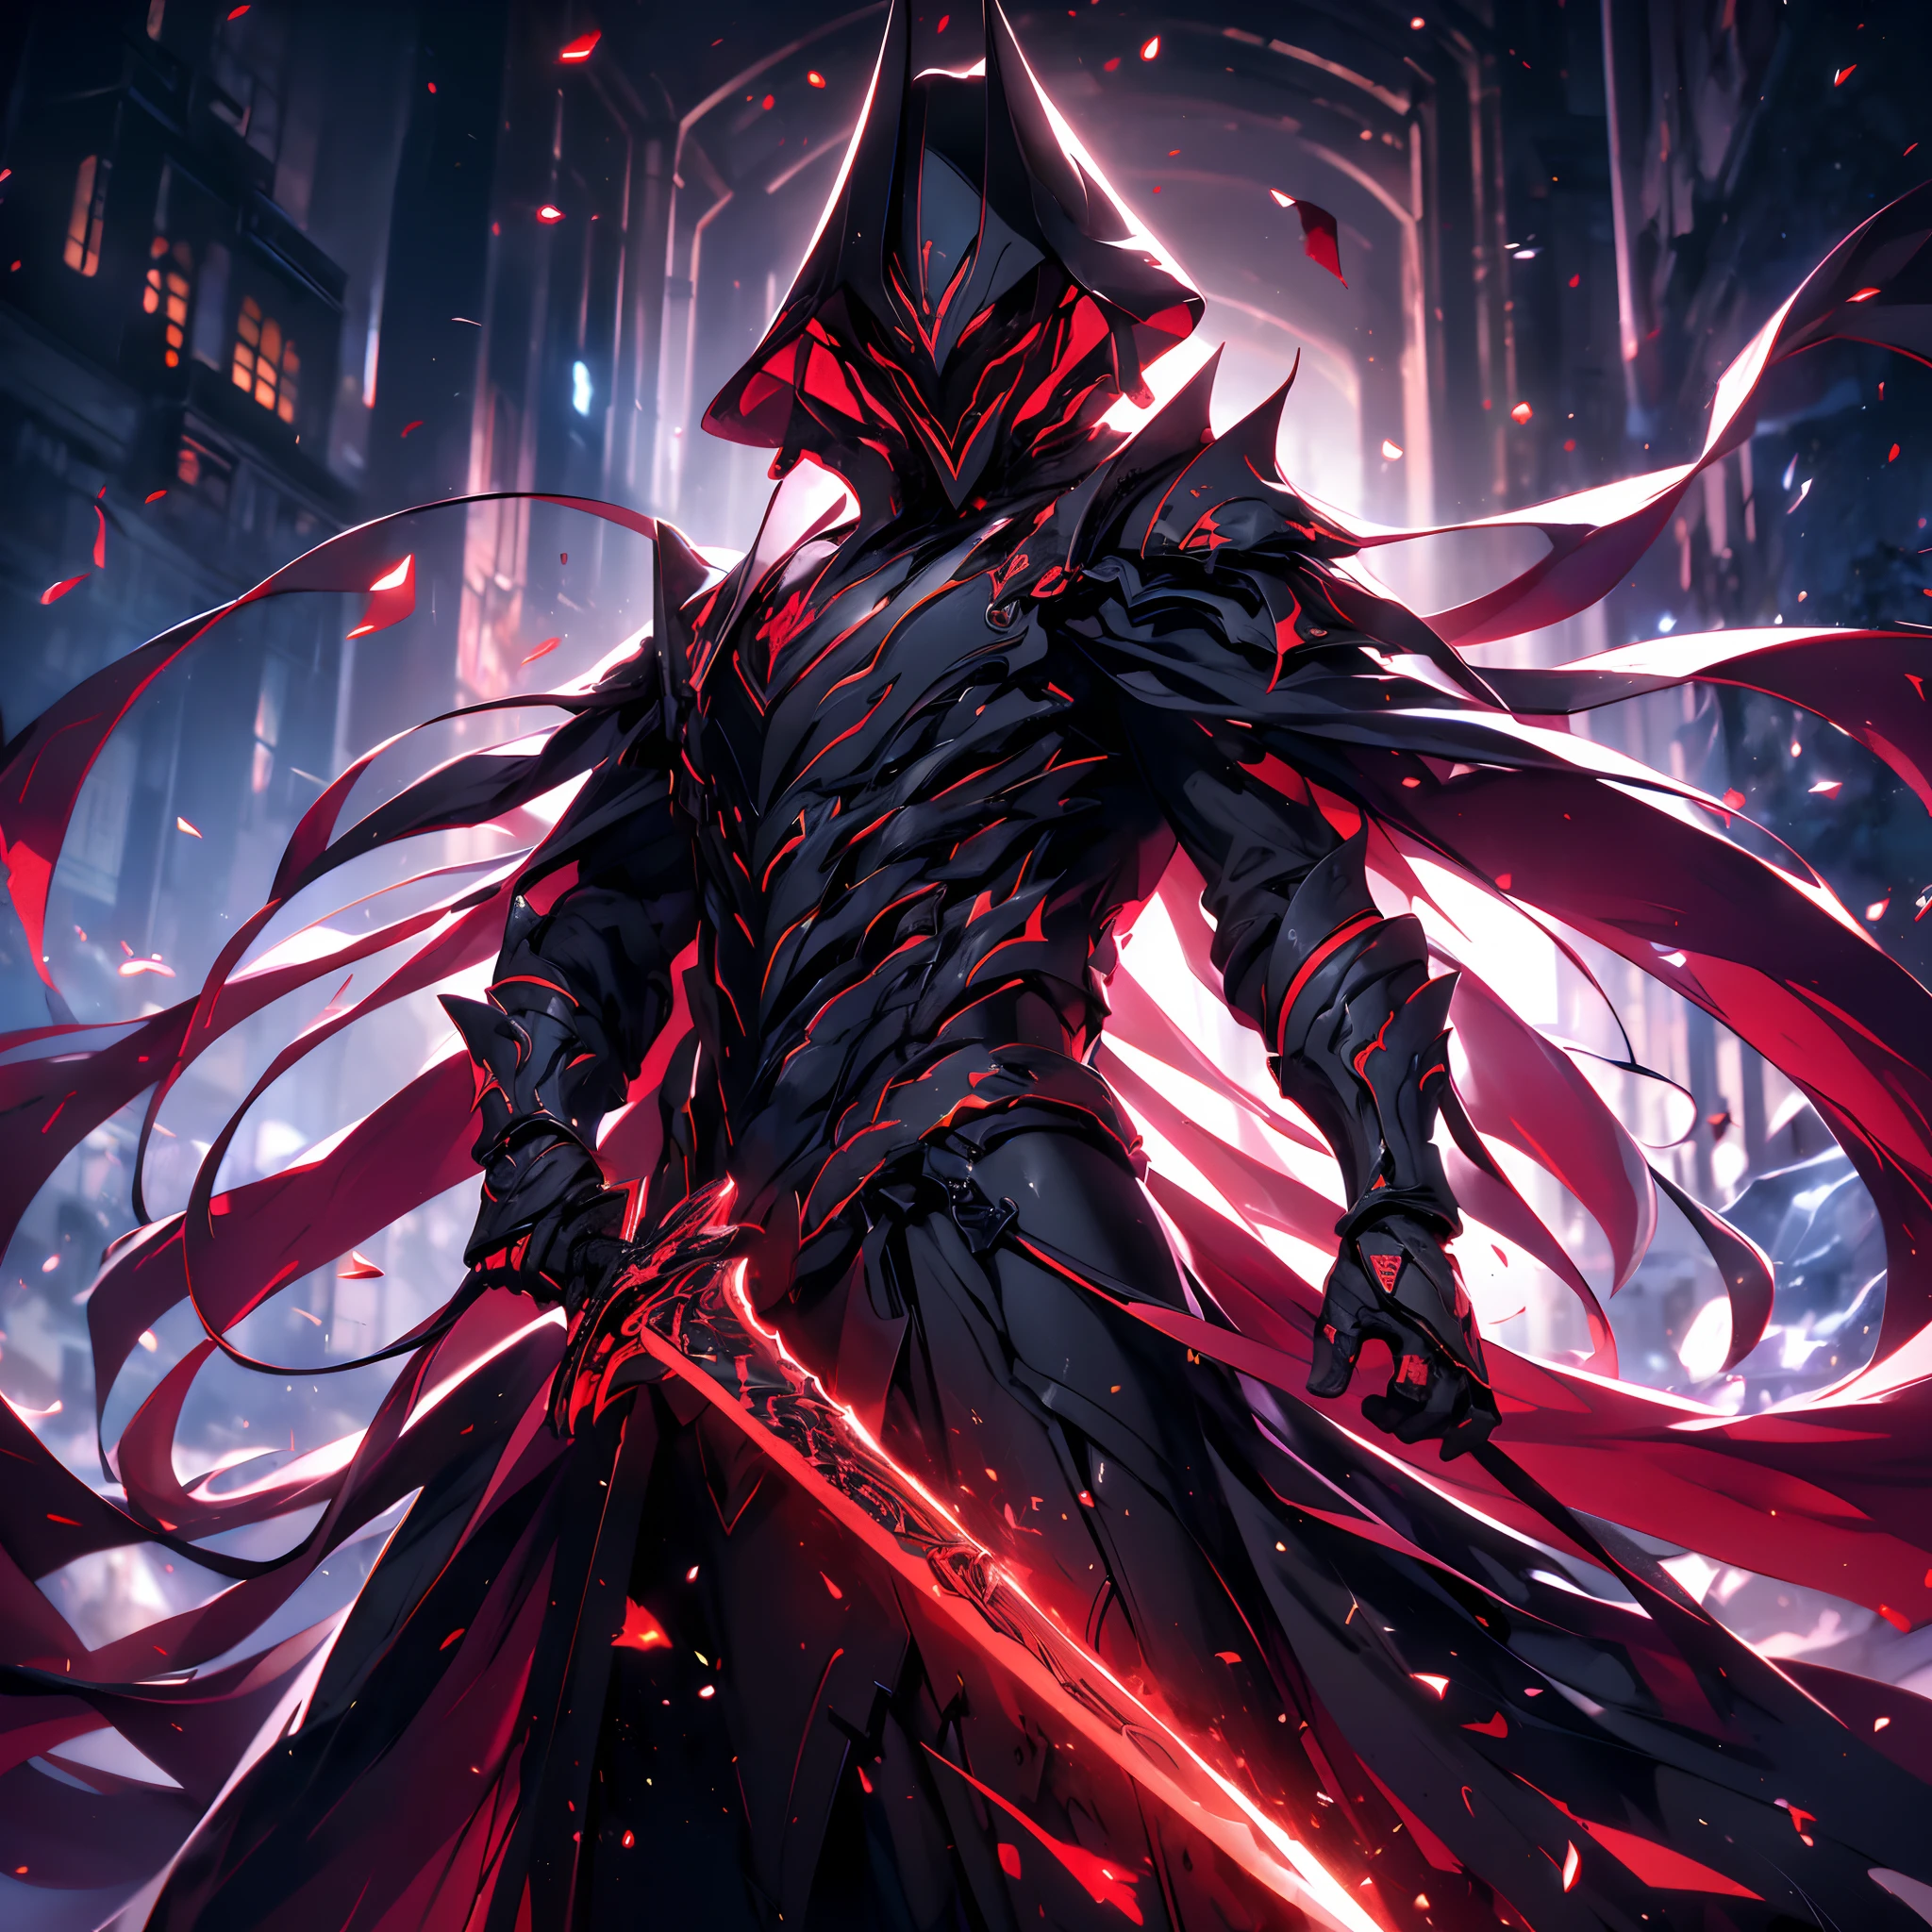 (ultra-detailed CG unit 8k wallpaper, Master parts, Best quality, depth of fields, hdr, complex), Tall, The sinister Dark Assassin wears a metal mask，Bright red eyes，violet and dark armor，Behind him he wears a low-key violet cloak，Holding a sharp dagger in his arms，Step into the burning village, (complex: 1.4) (Master parts: 1.4) (illustration: 1.4), Red studio lighting, Post-processing, 8K resolution, deep dark background, imposing, Well-composed photos, Impressive, dark fantacy (Director: greg rutkovsky: 1.2), (darken: 1.5)（10 people:1.8）